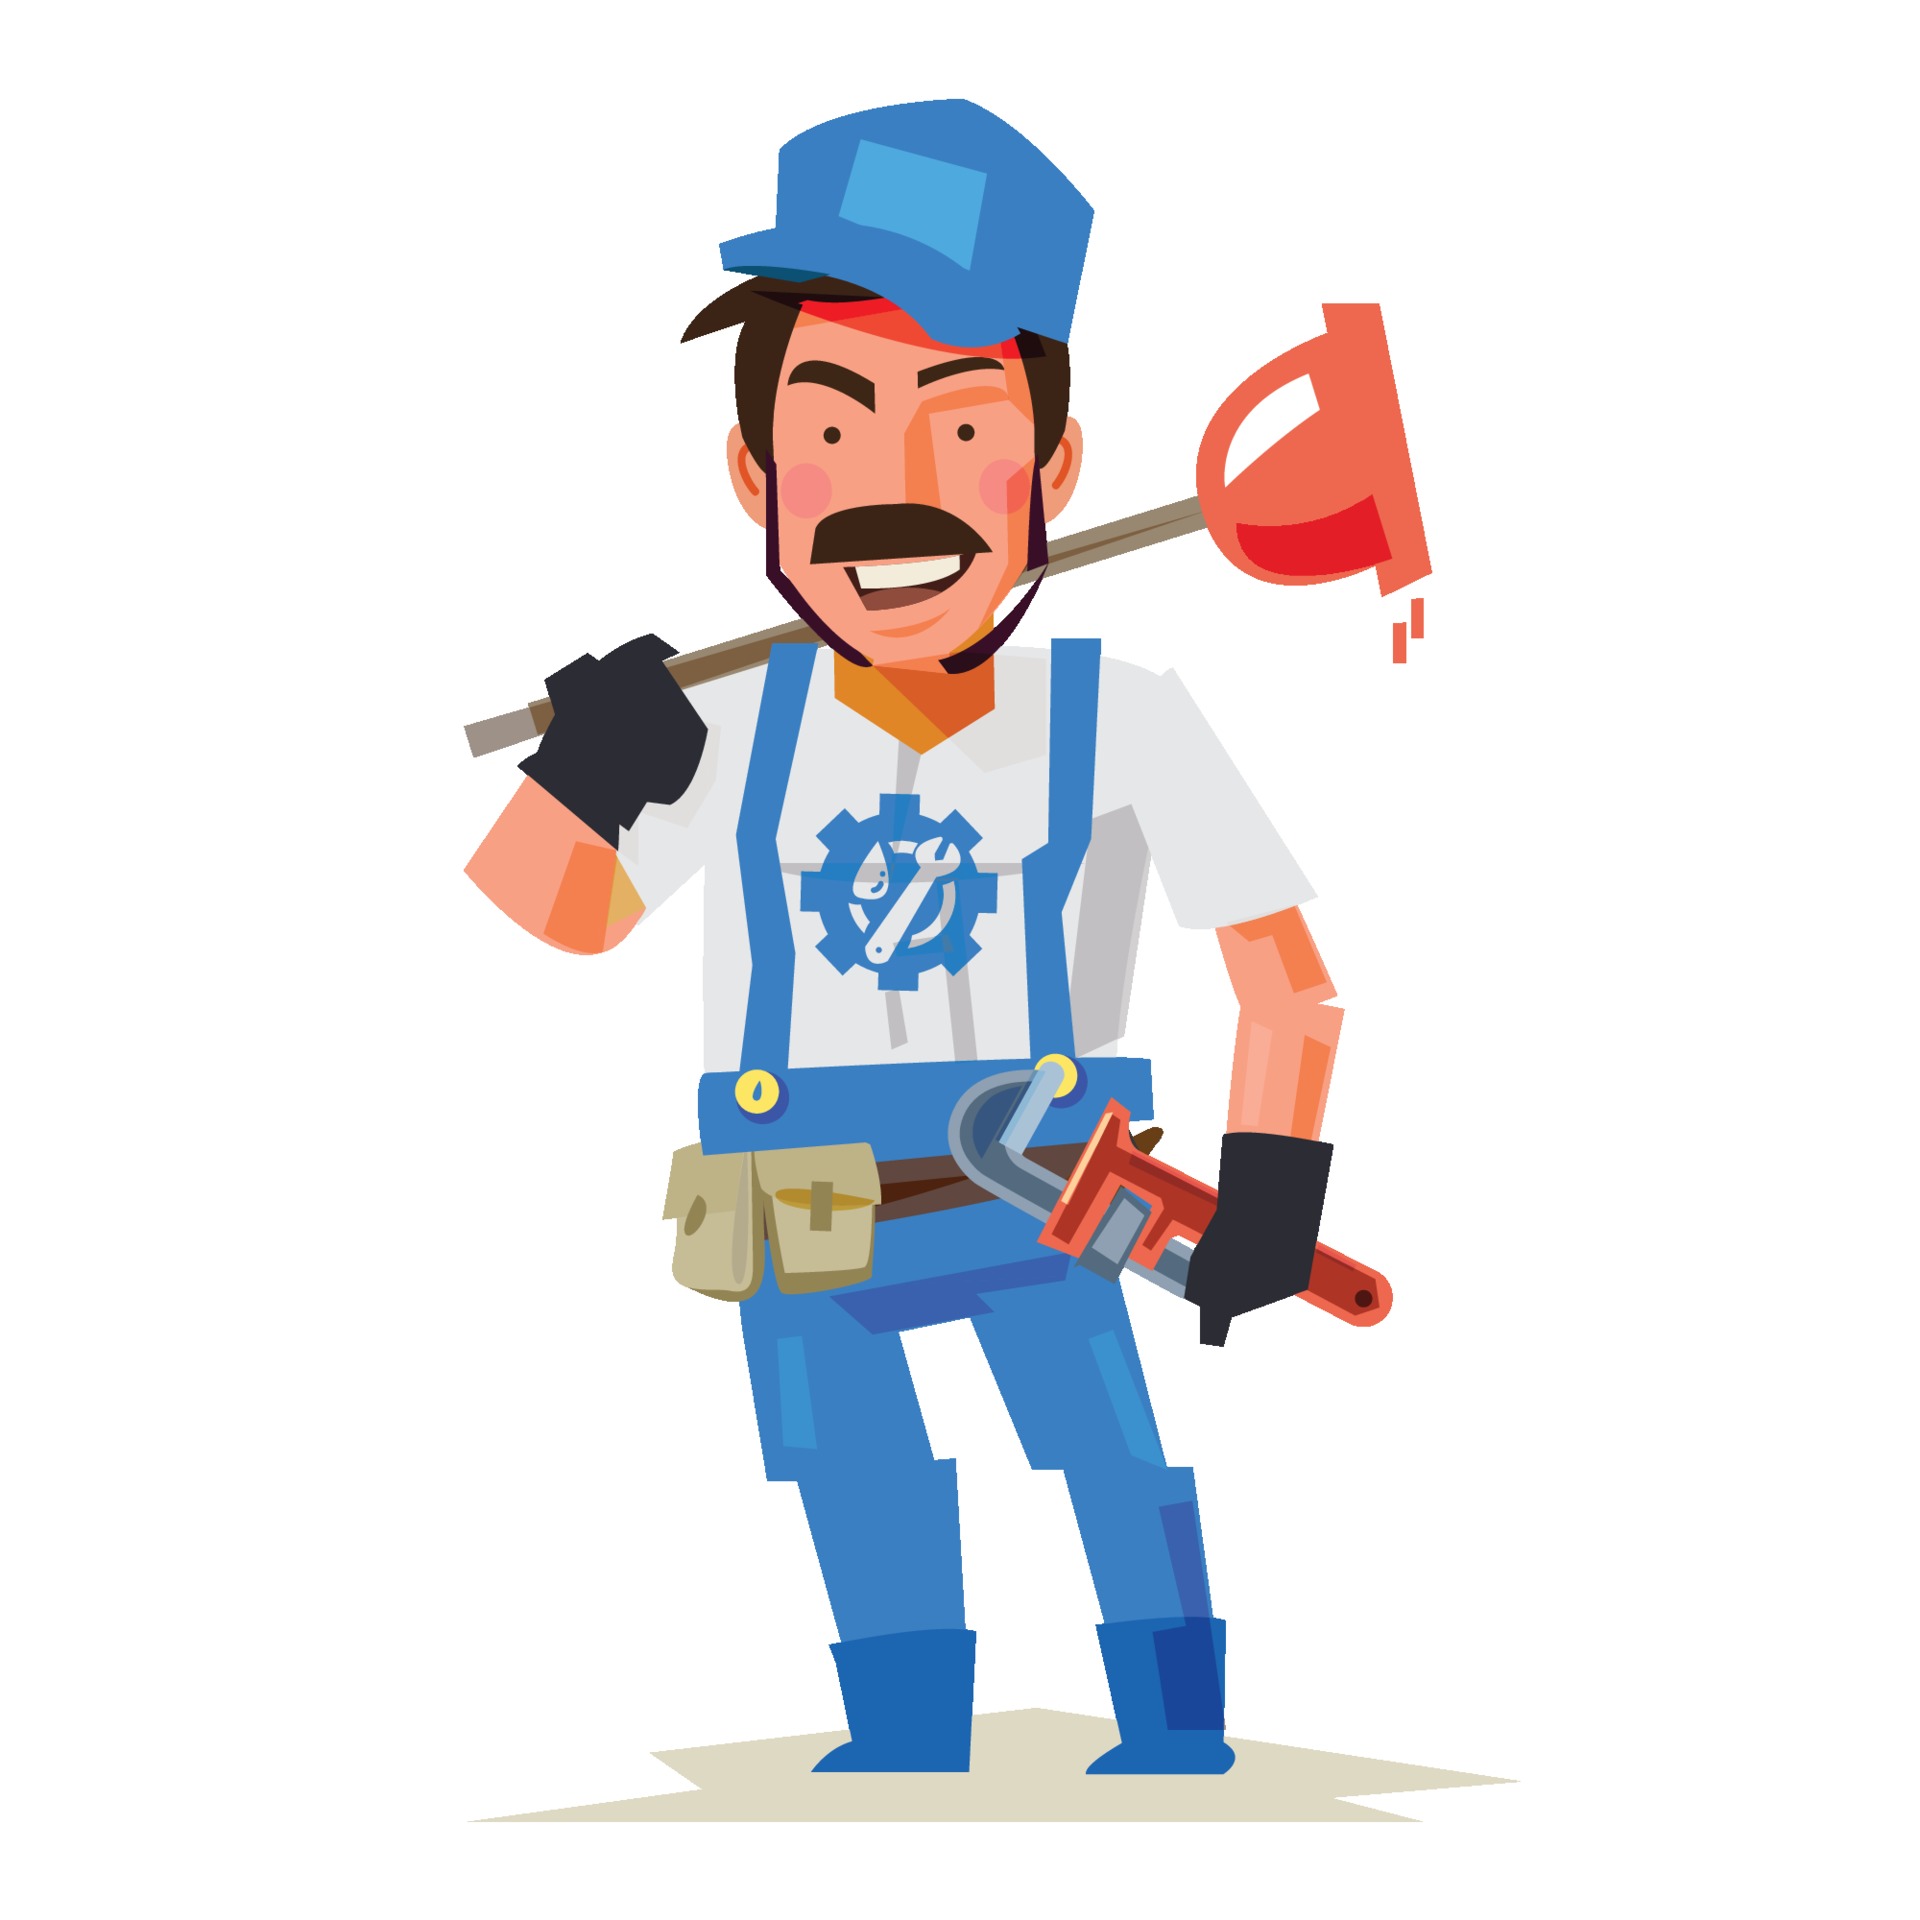 Download the Plumber character vector illustration 1937932